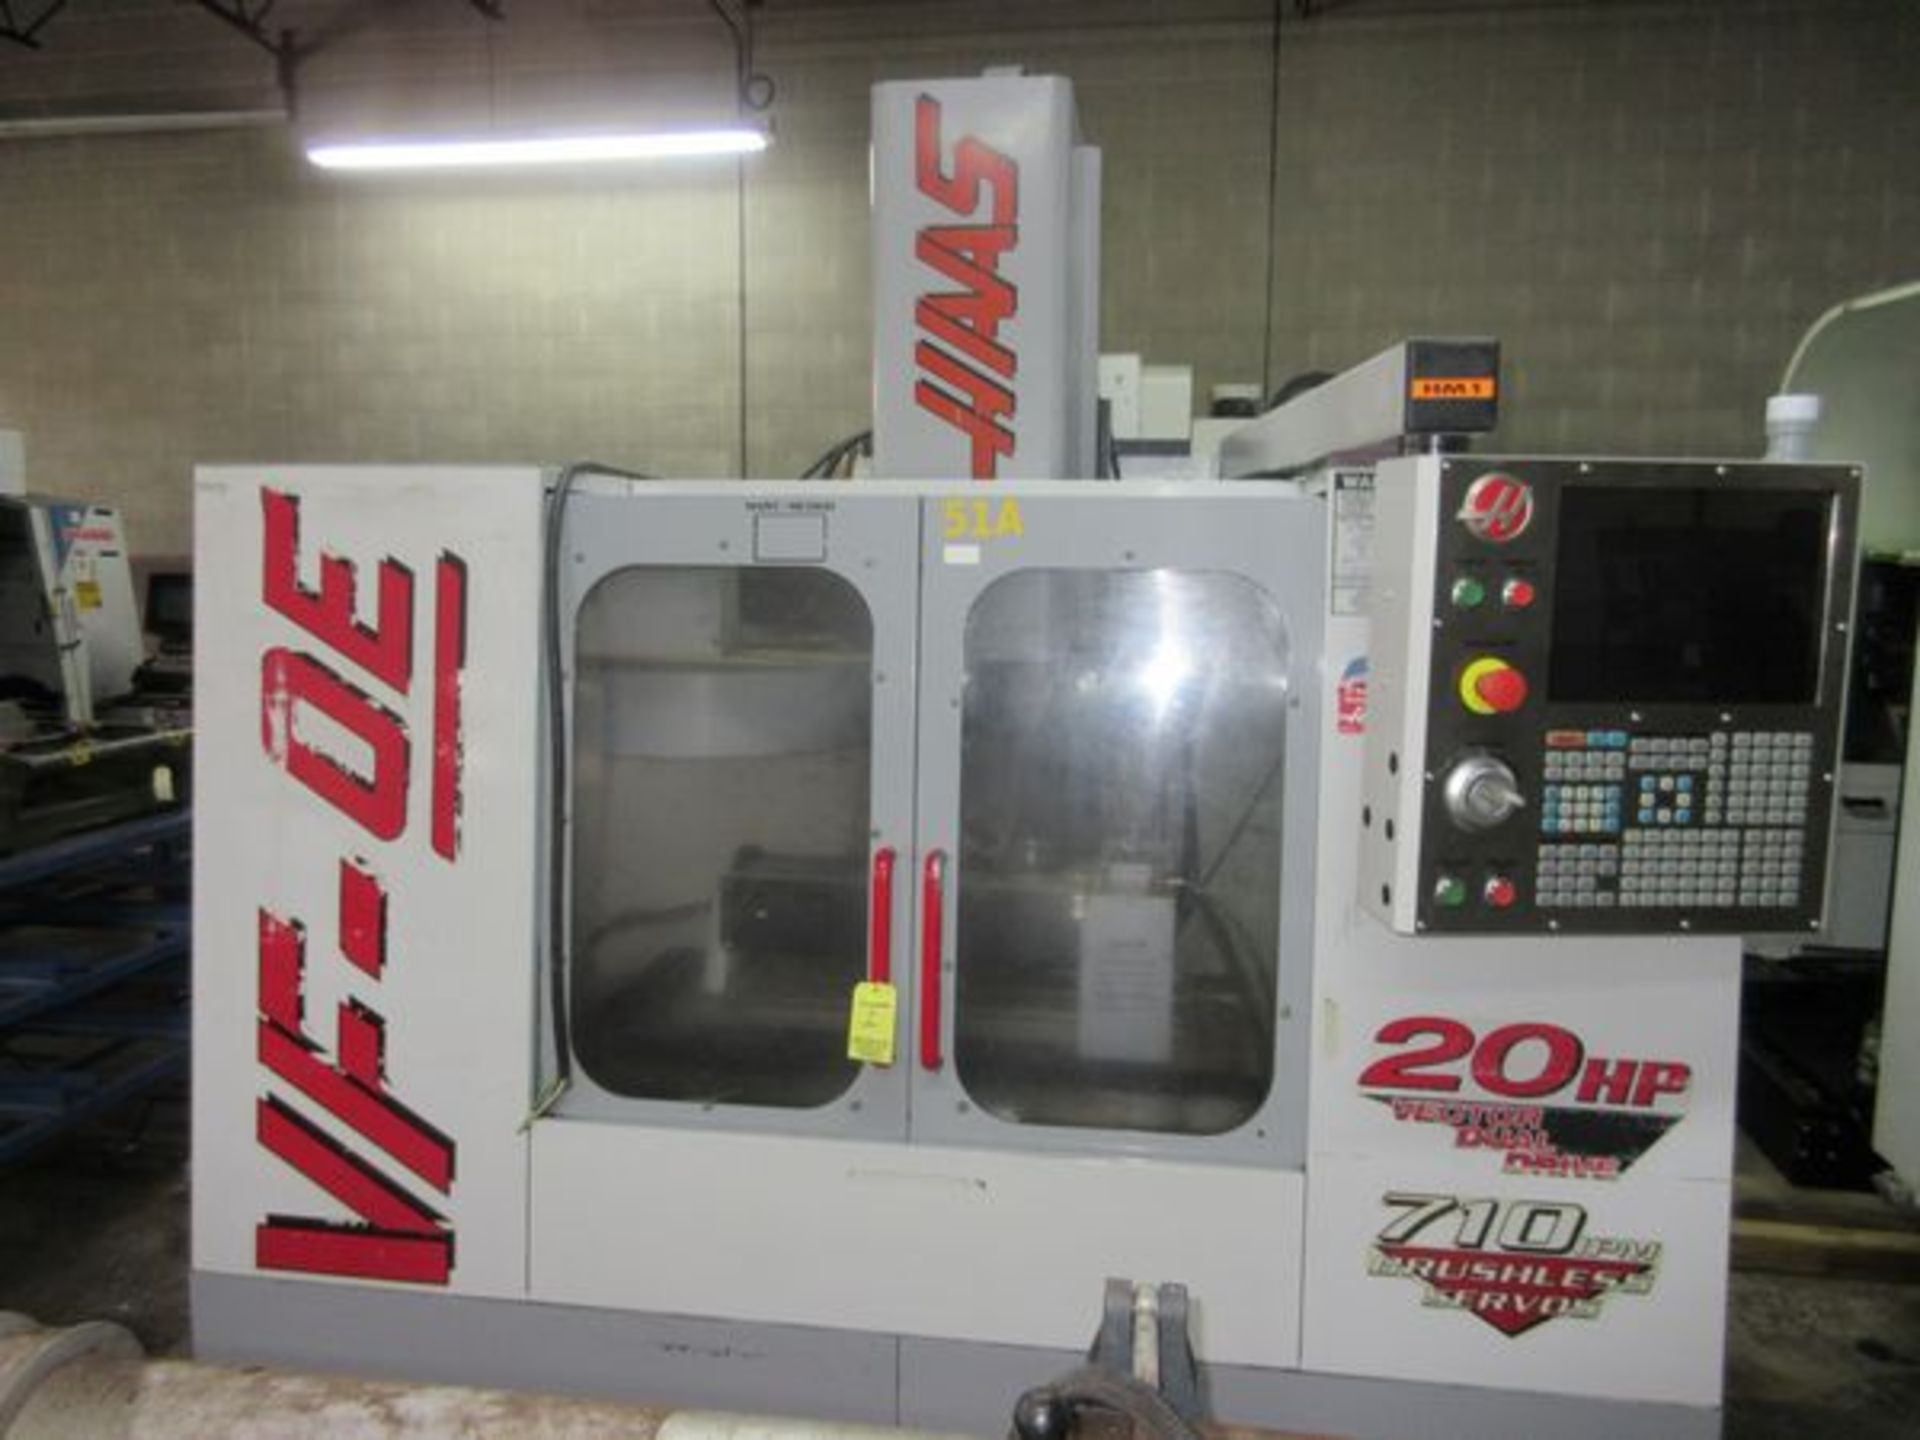 1999 Haas VF-OE CNC Vertical Machining Center, s/n 17160, 14x36" Table, Updated Haas Control, Haas